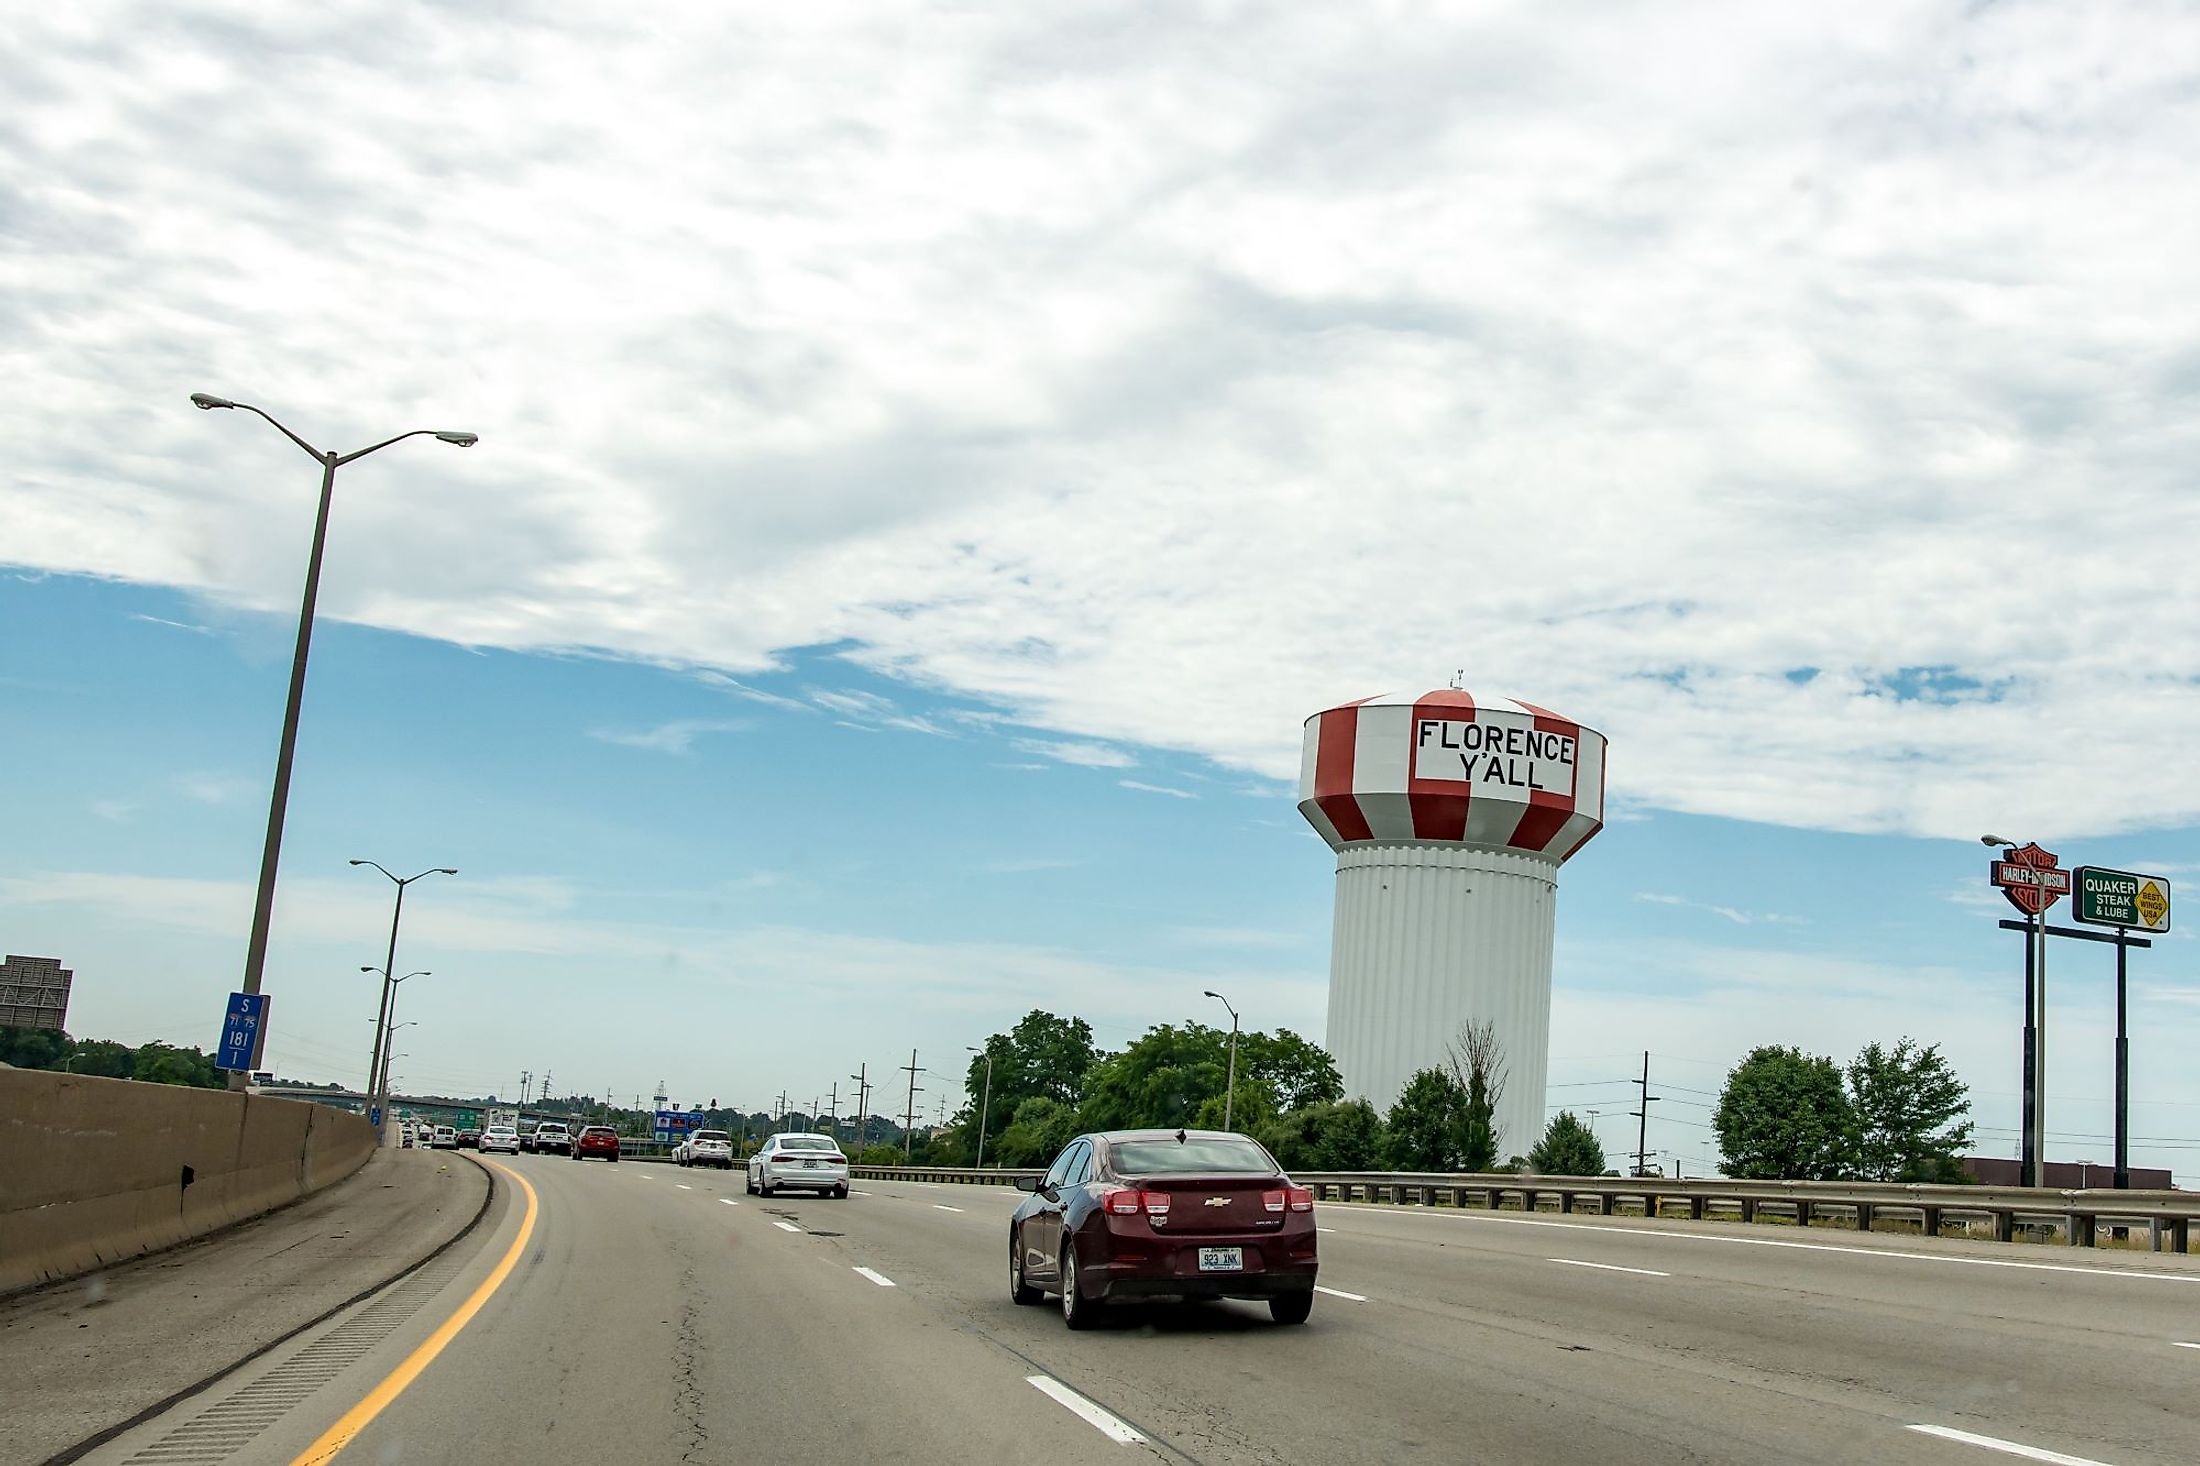 Traveling south on Interstate 71 past Florence's iconic water tower landmark. Editorial credit: JNix / Shutterstock.com